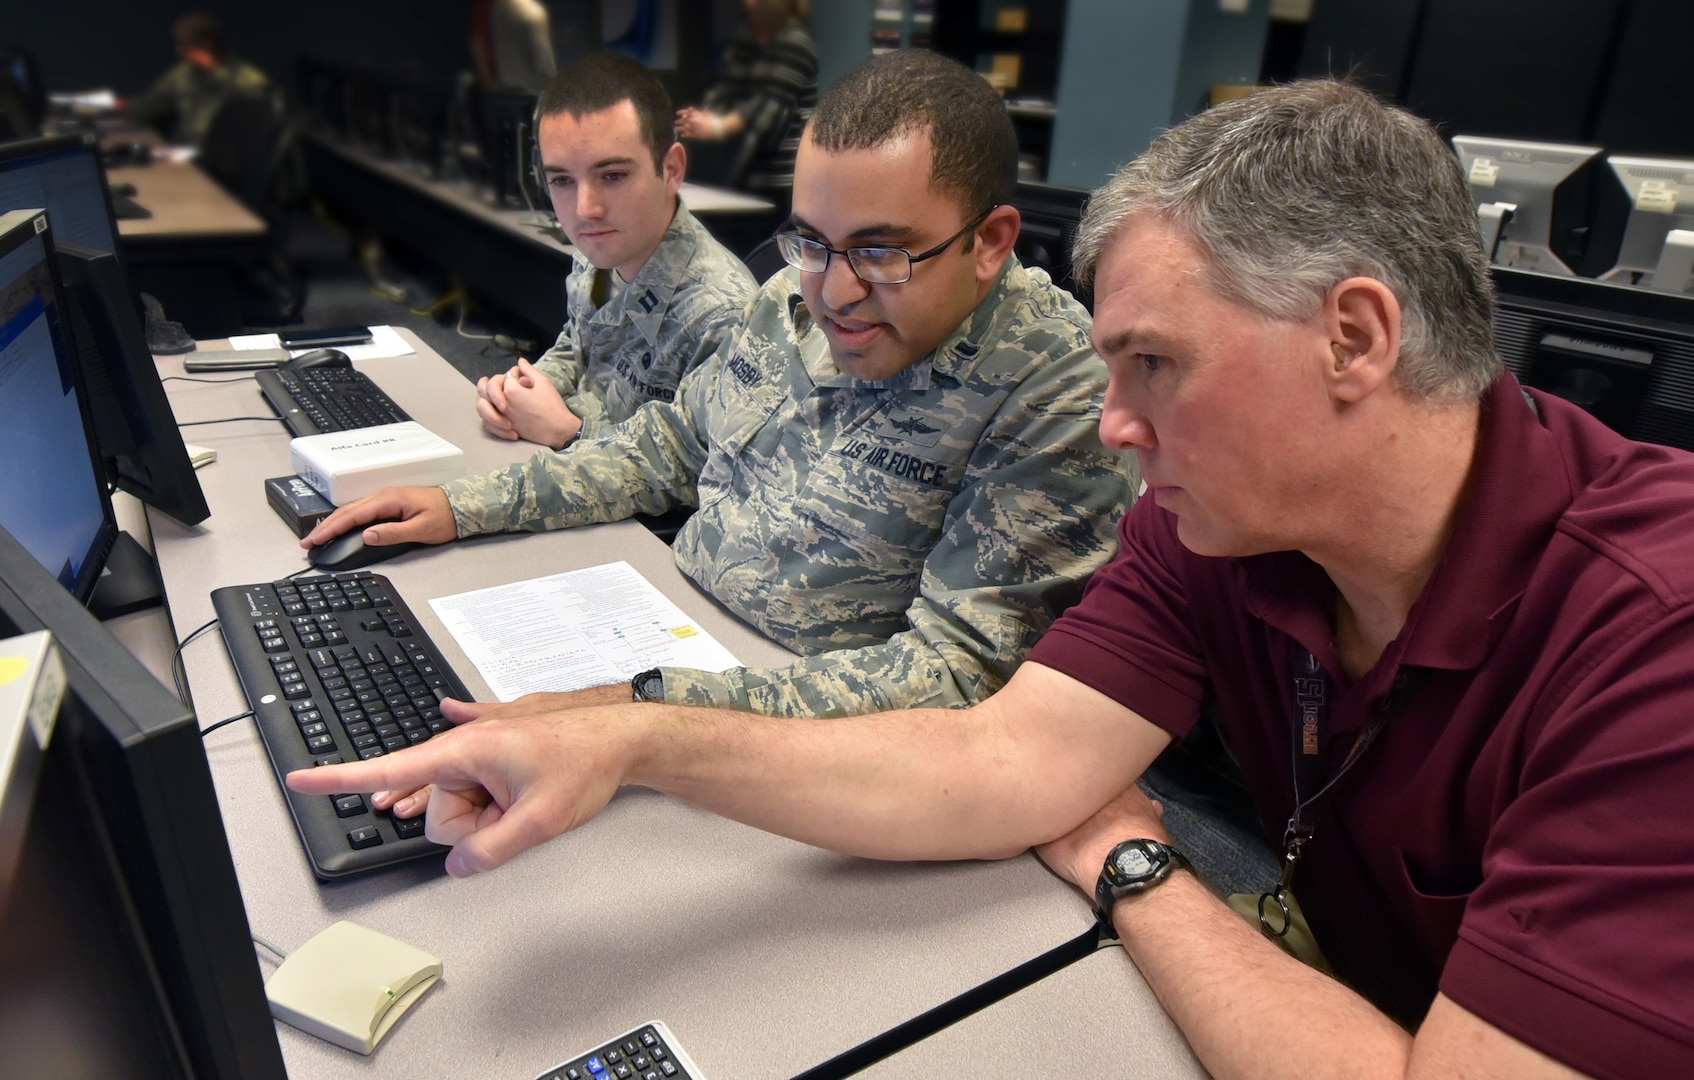 Air Force Institute of Technology students listen as professor (right) explains hacking technique during class at Wright-Patterson Air Force Base, Ohio,
February 20, 2018 (U.S. Air Force/Al Bright)